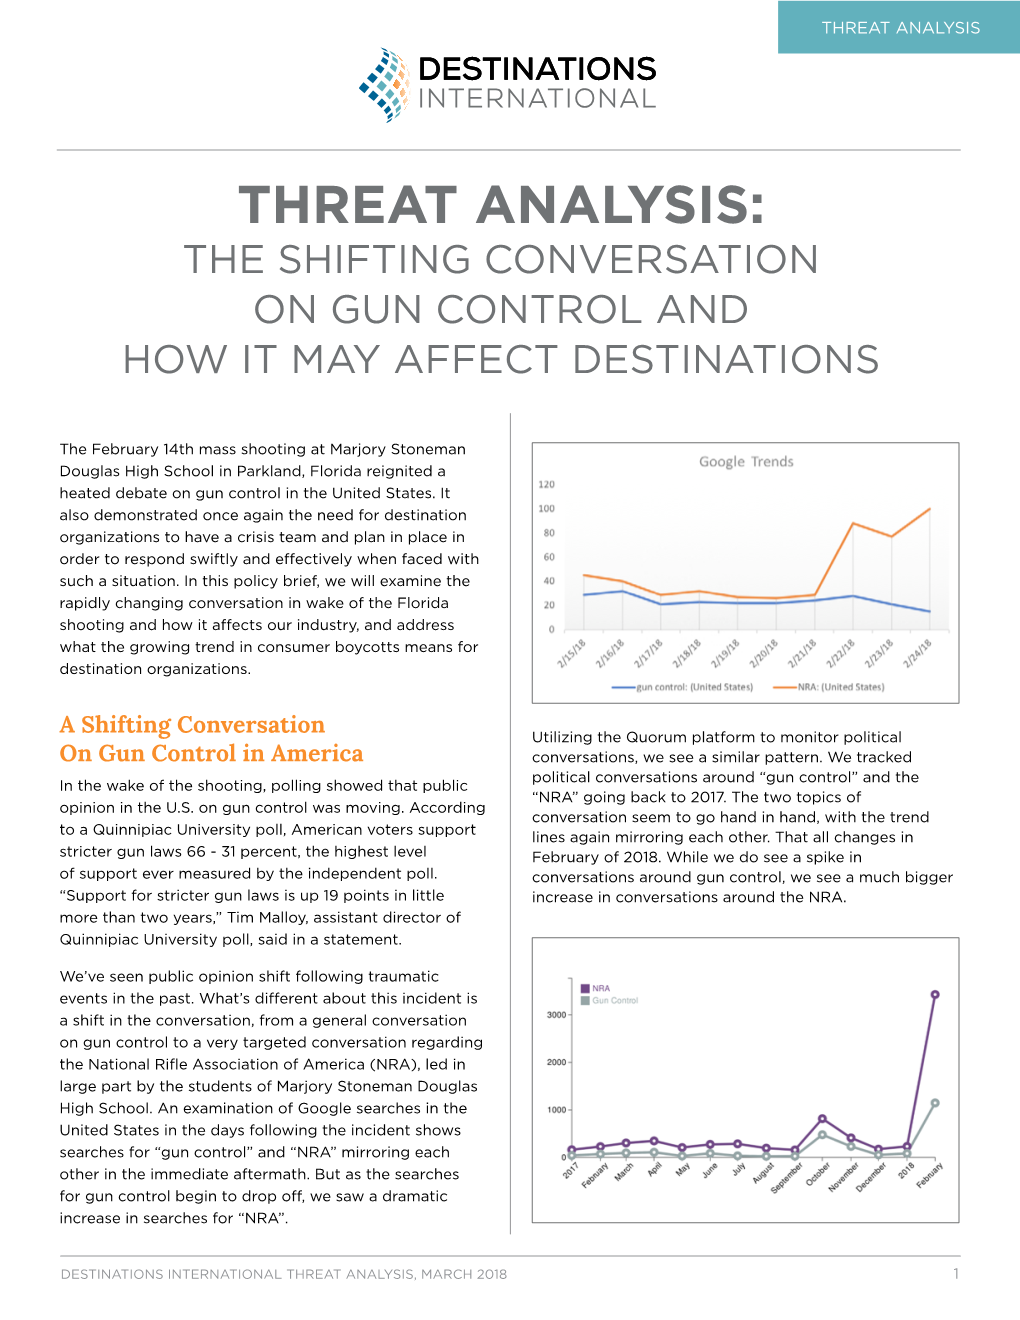 Download the Threat Analysis